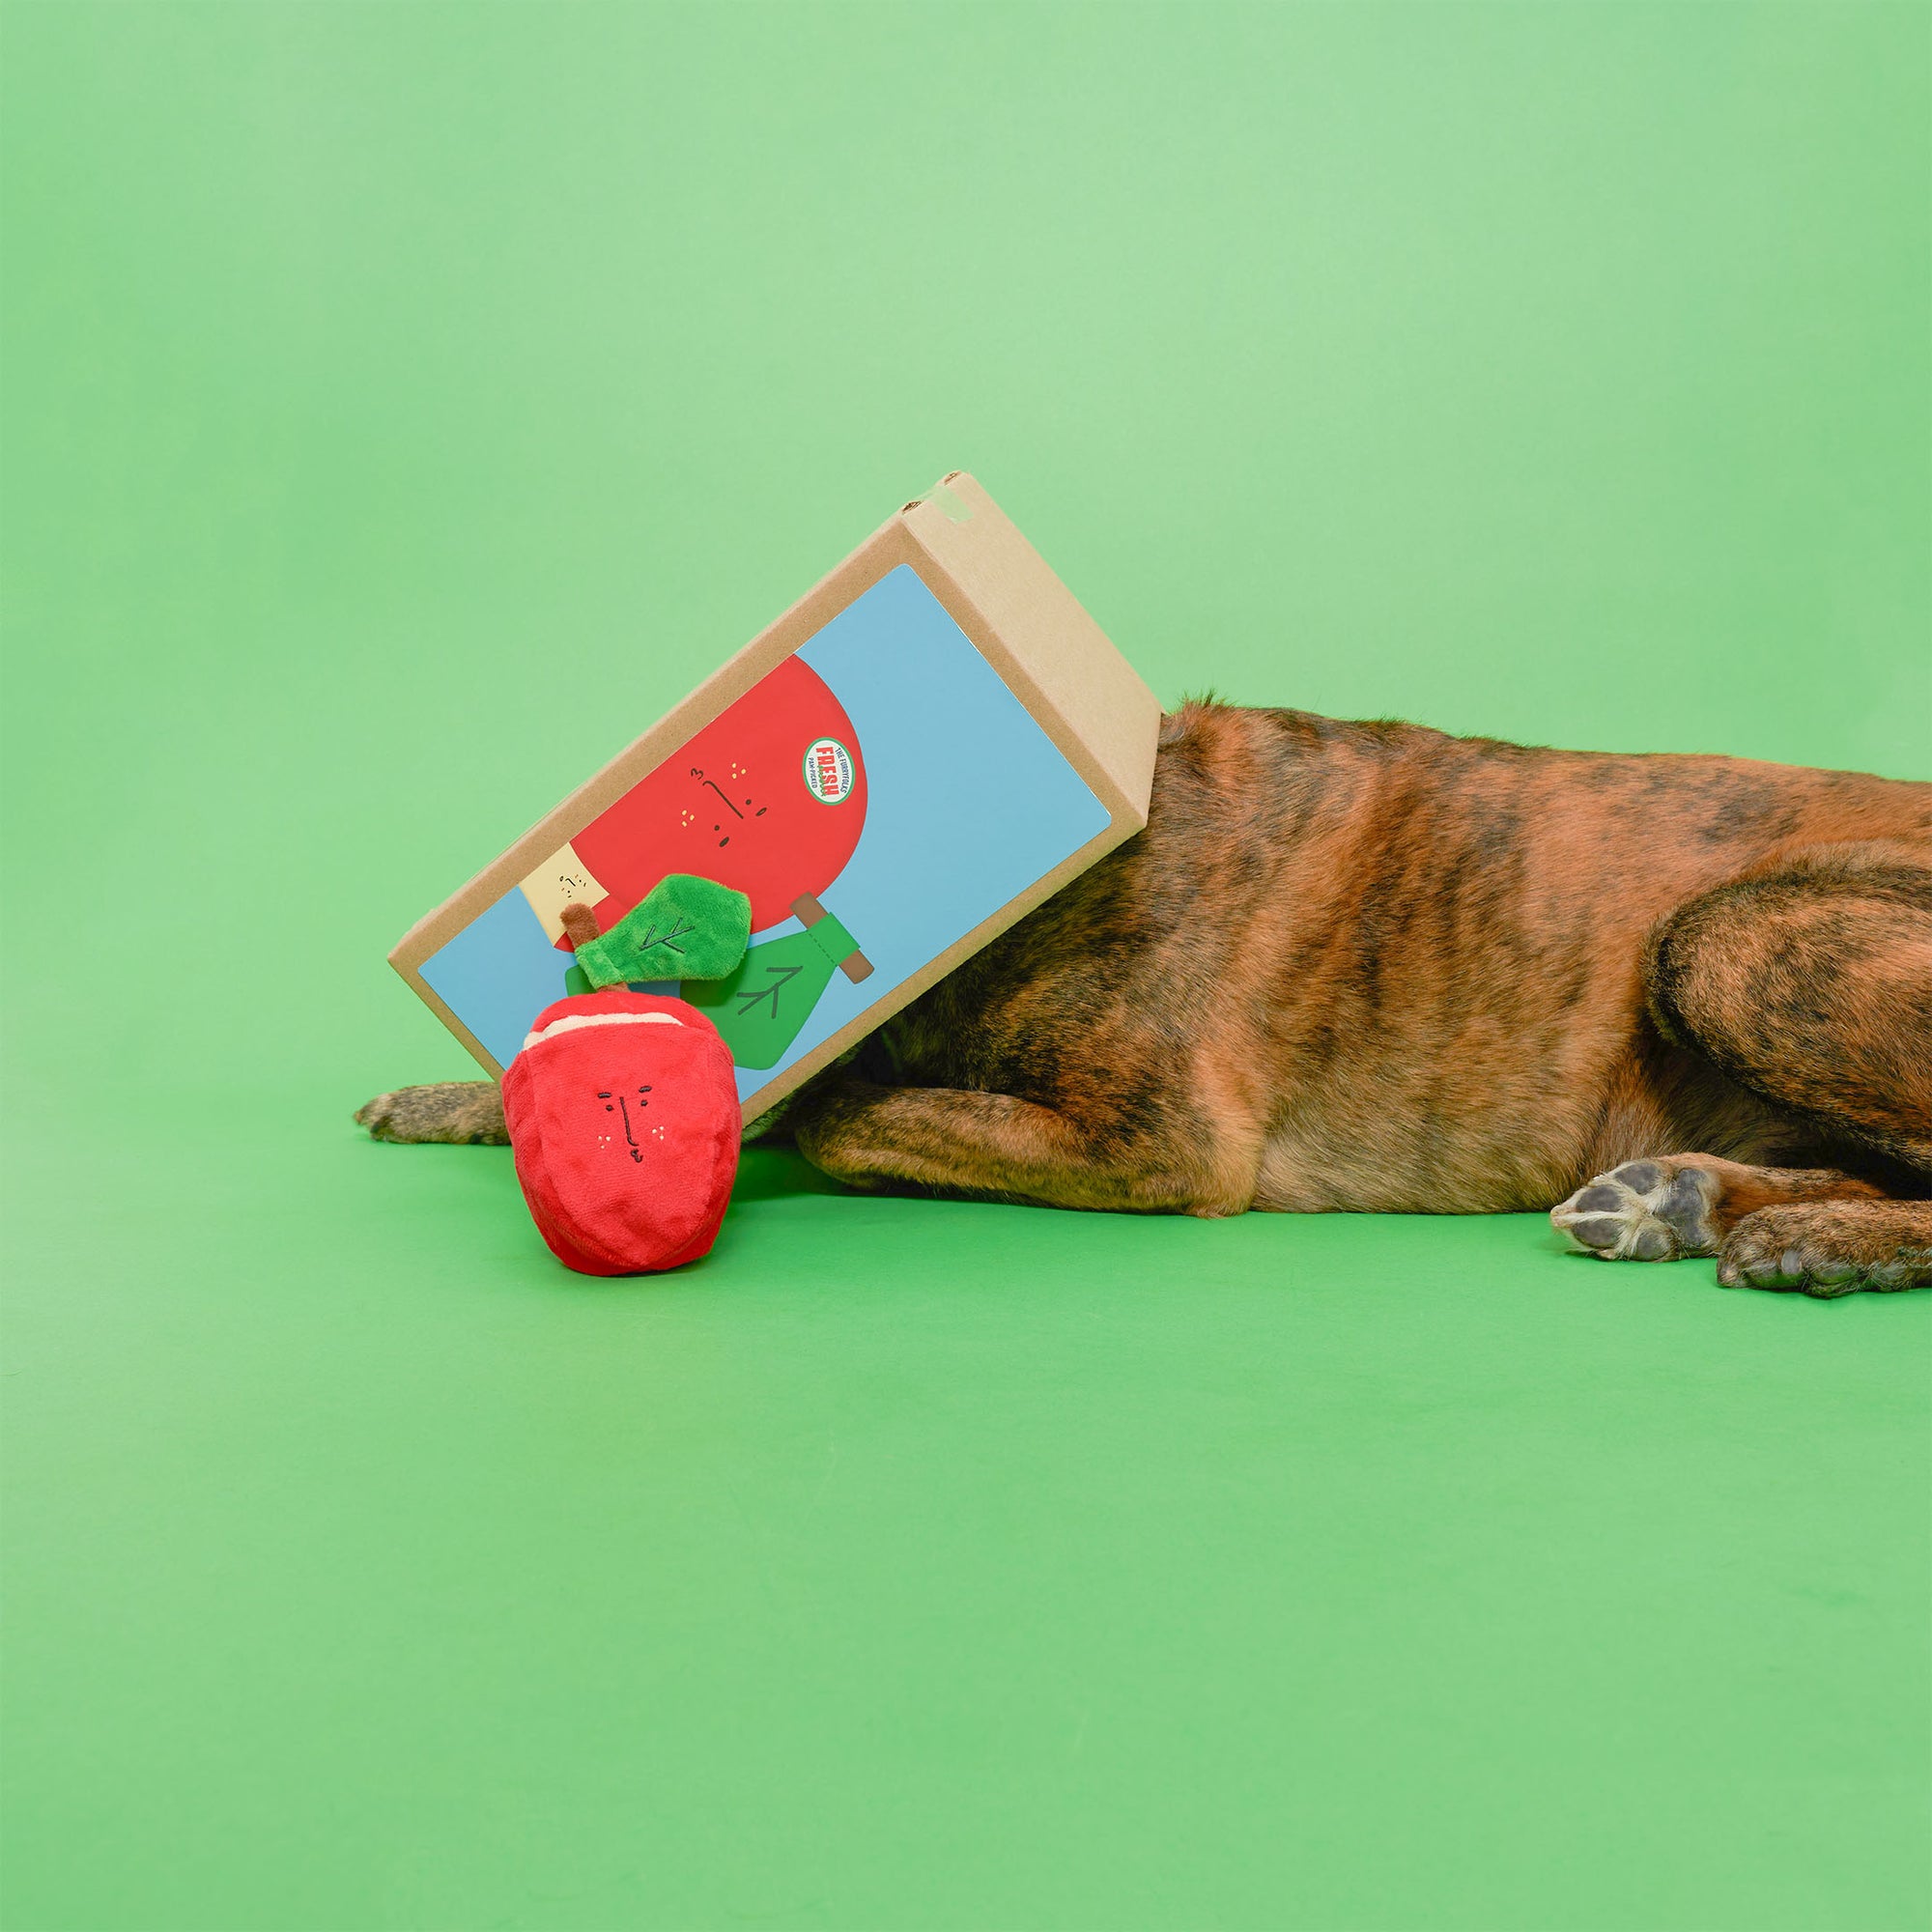 A brown dog lying down on a green background with a cardboard box on its head, and a red apple-shaped dog toy in front of it.